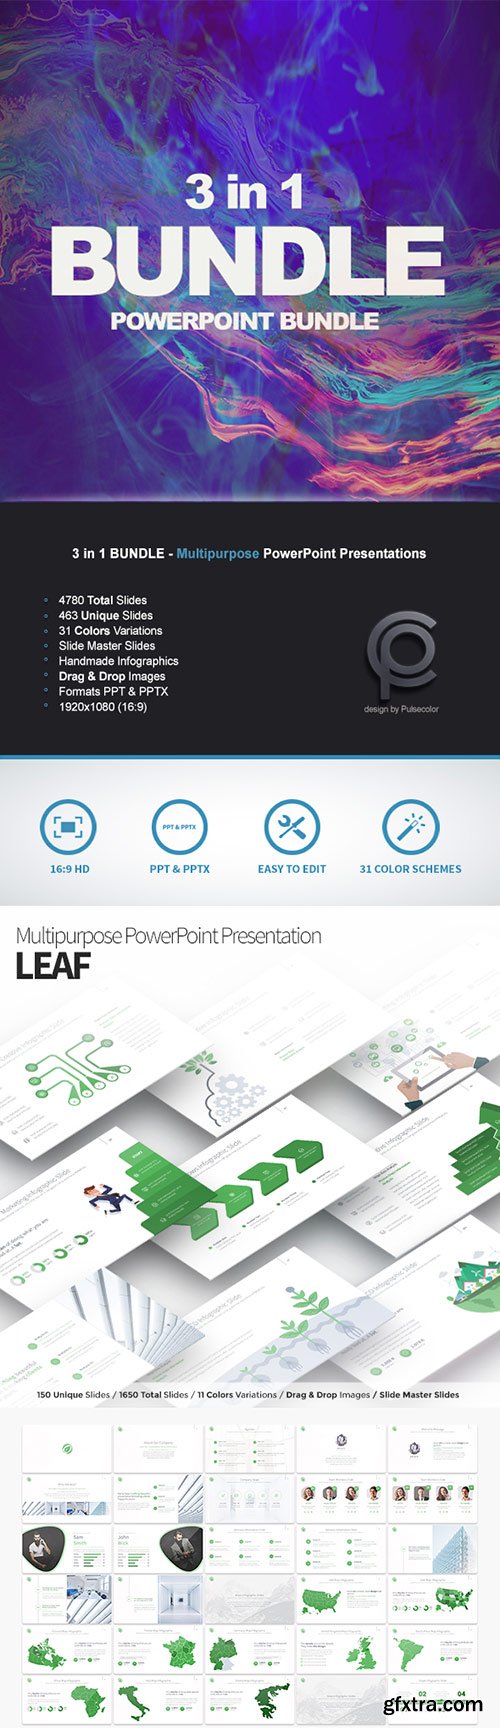 Graphicriver - BUNDLE 3in1 - Multipurpose PowerPoint Presentations 20177994